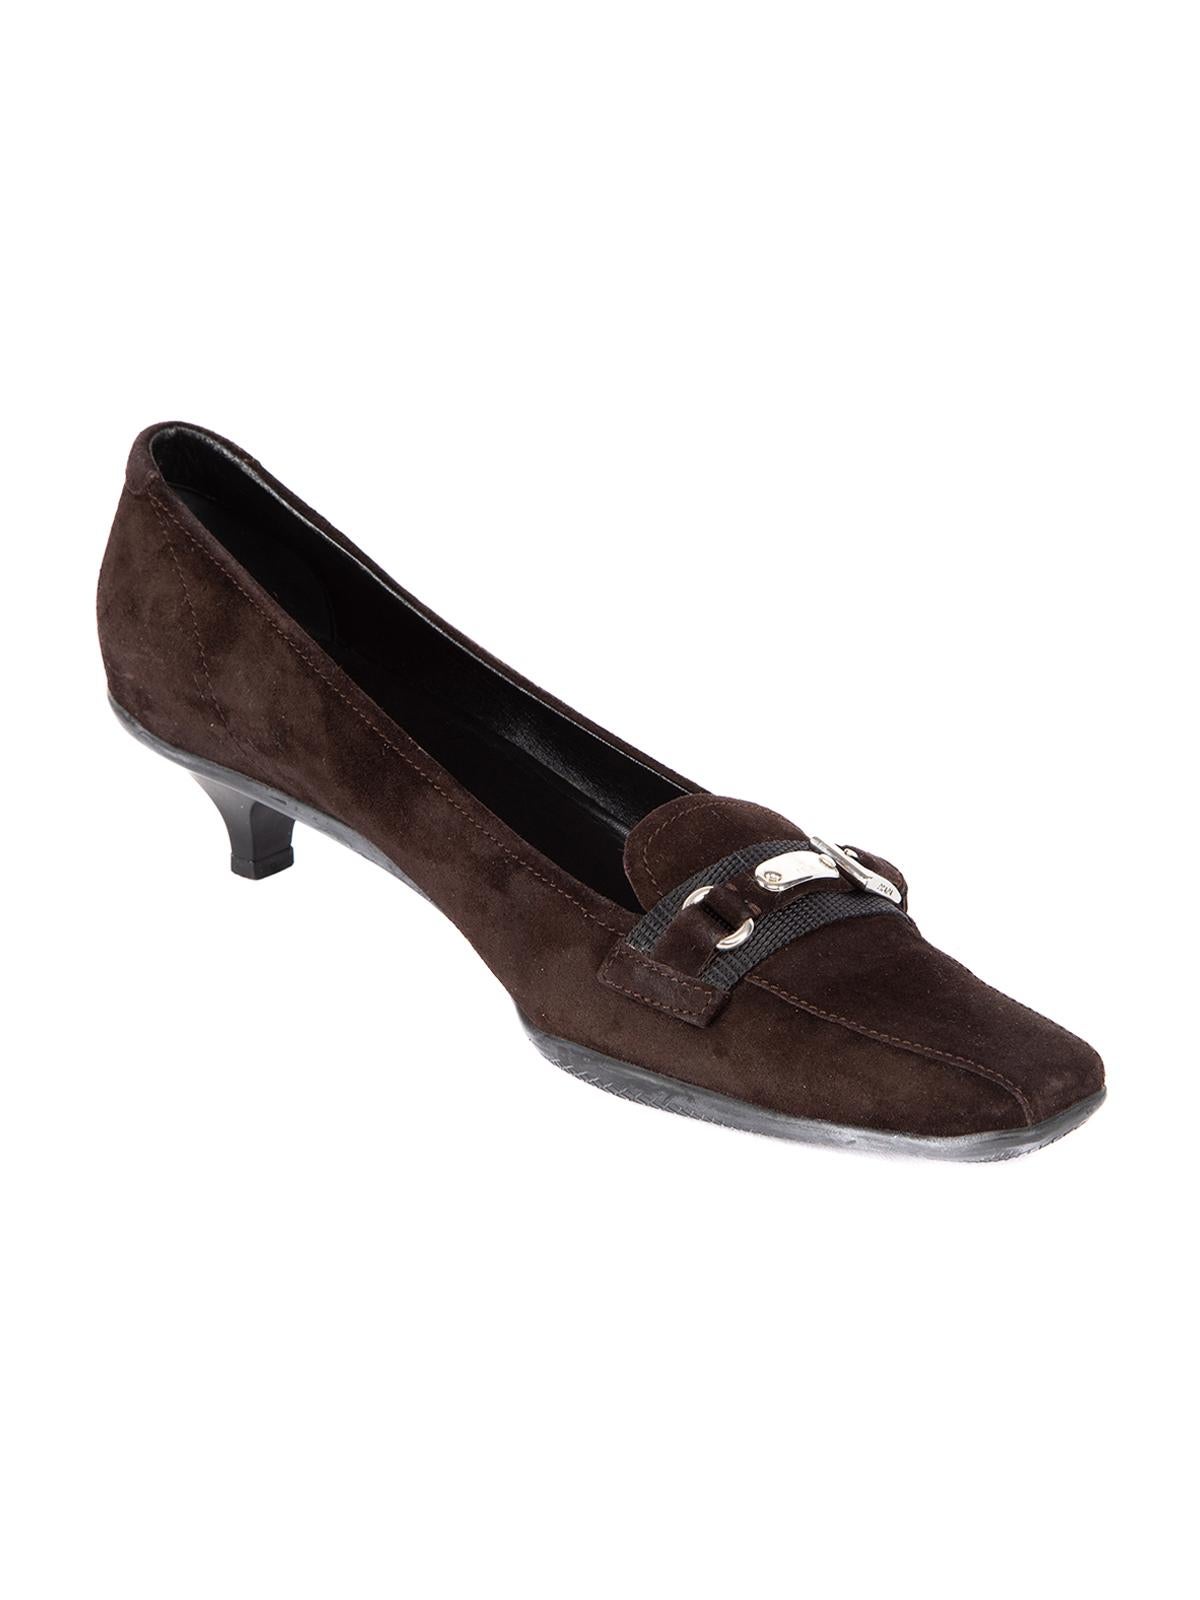 CONDITION is Very good. Minimal wear to heels is evident. Minimal wear to overall suede exterior on this used Prada designer resale item. Details Brown Suede Loafer style Kitten heel Square toe Silver tone buckle detail Leather lining Made in Italy